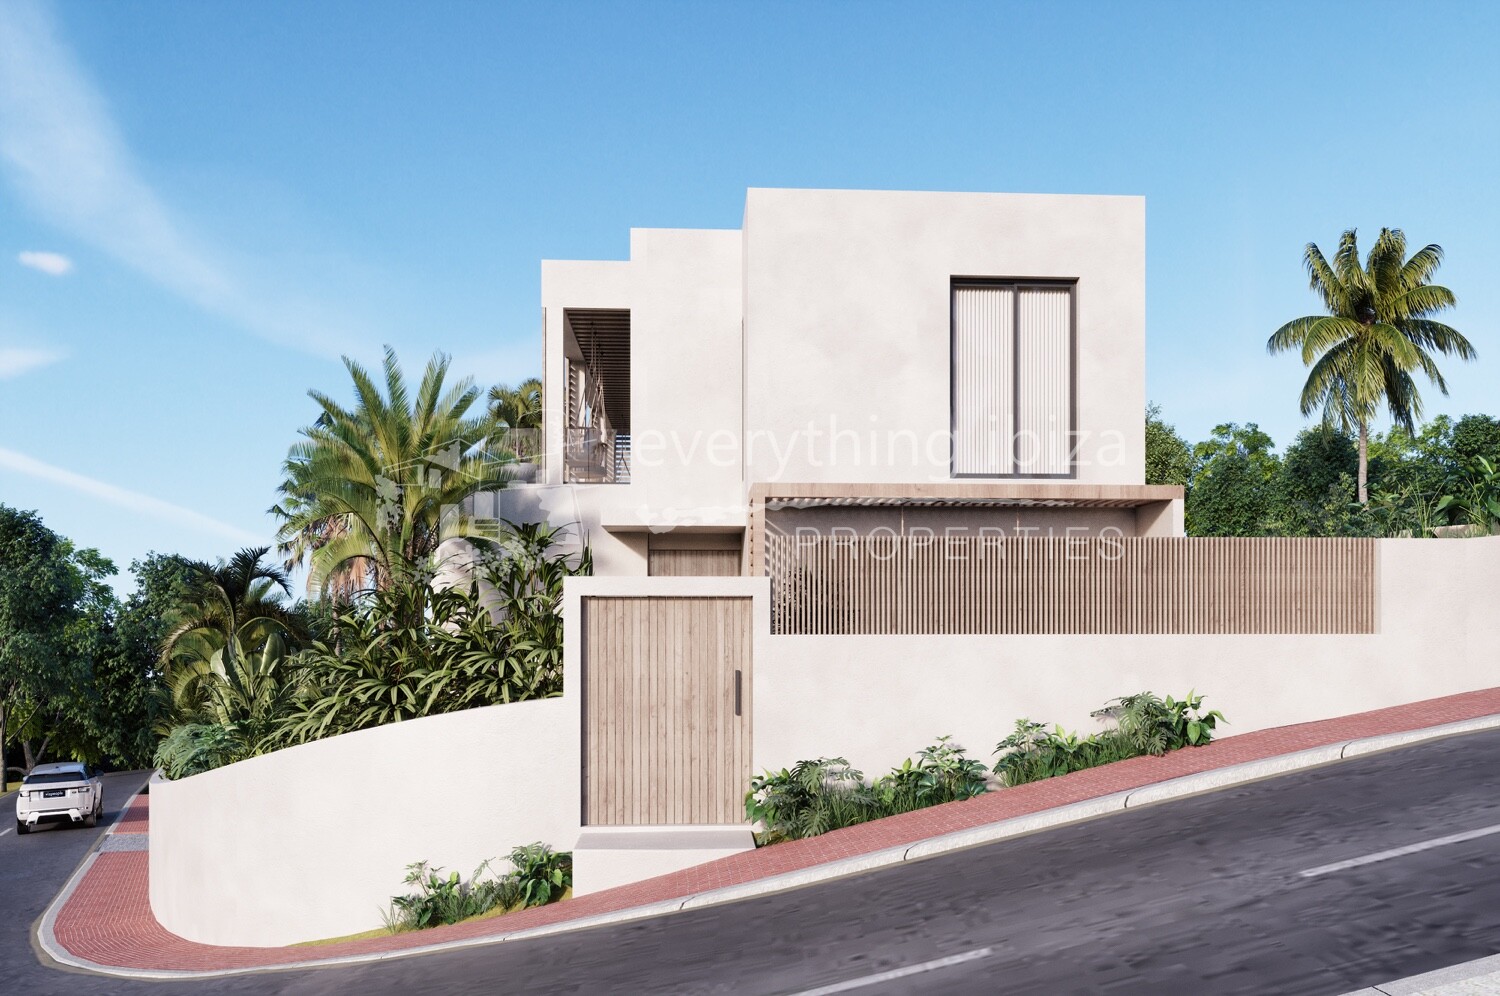 Luxury New Build Villa Close to Jesus, ref. 1217, for sale in Ibiza by everything ibiza Properties